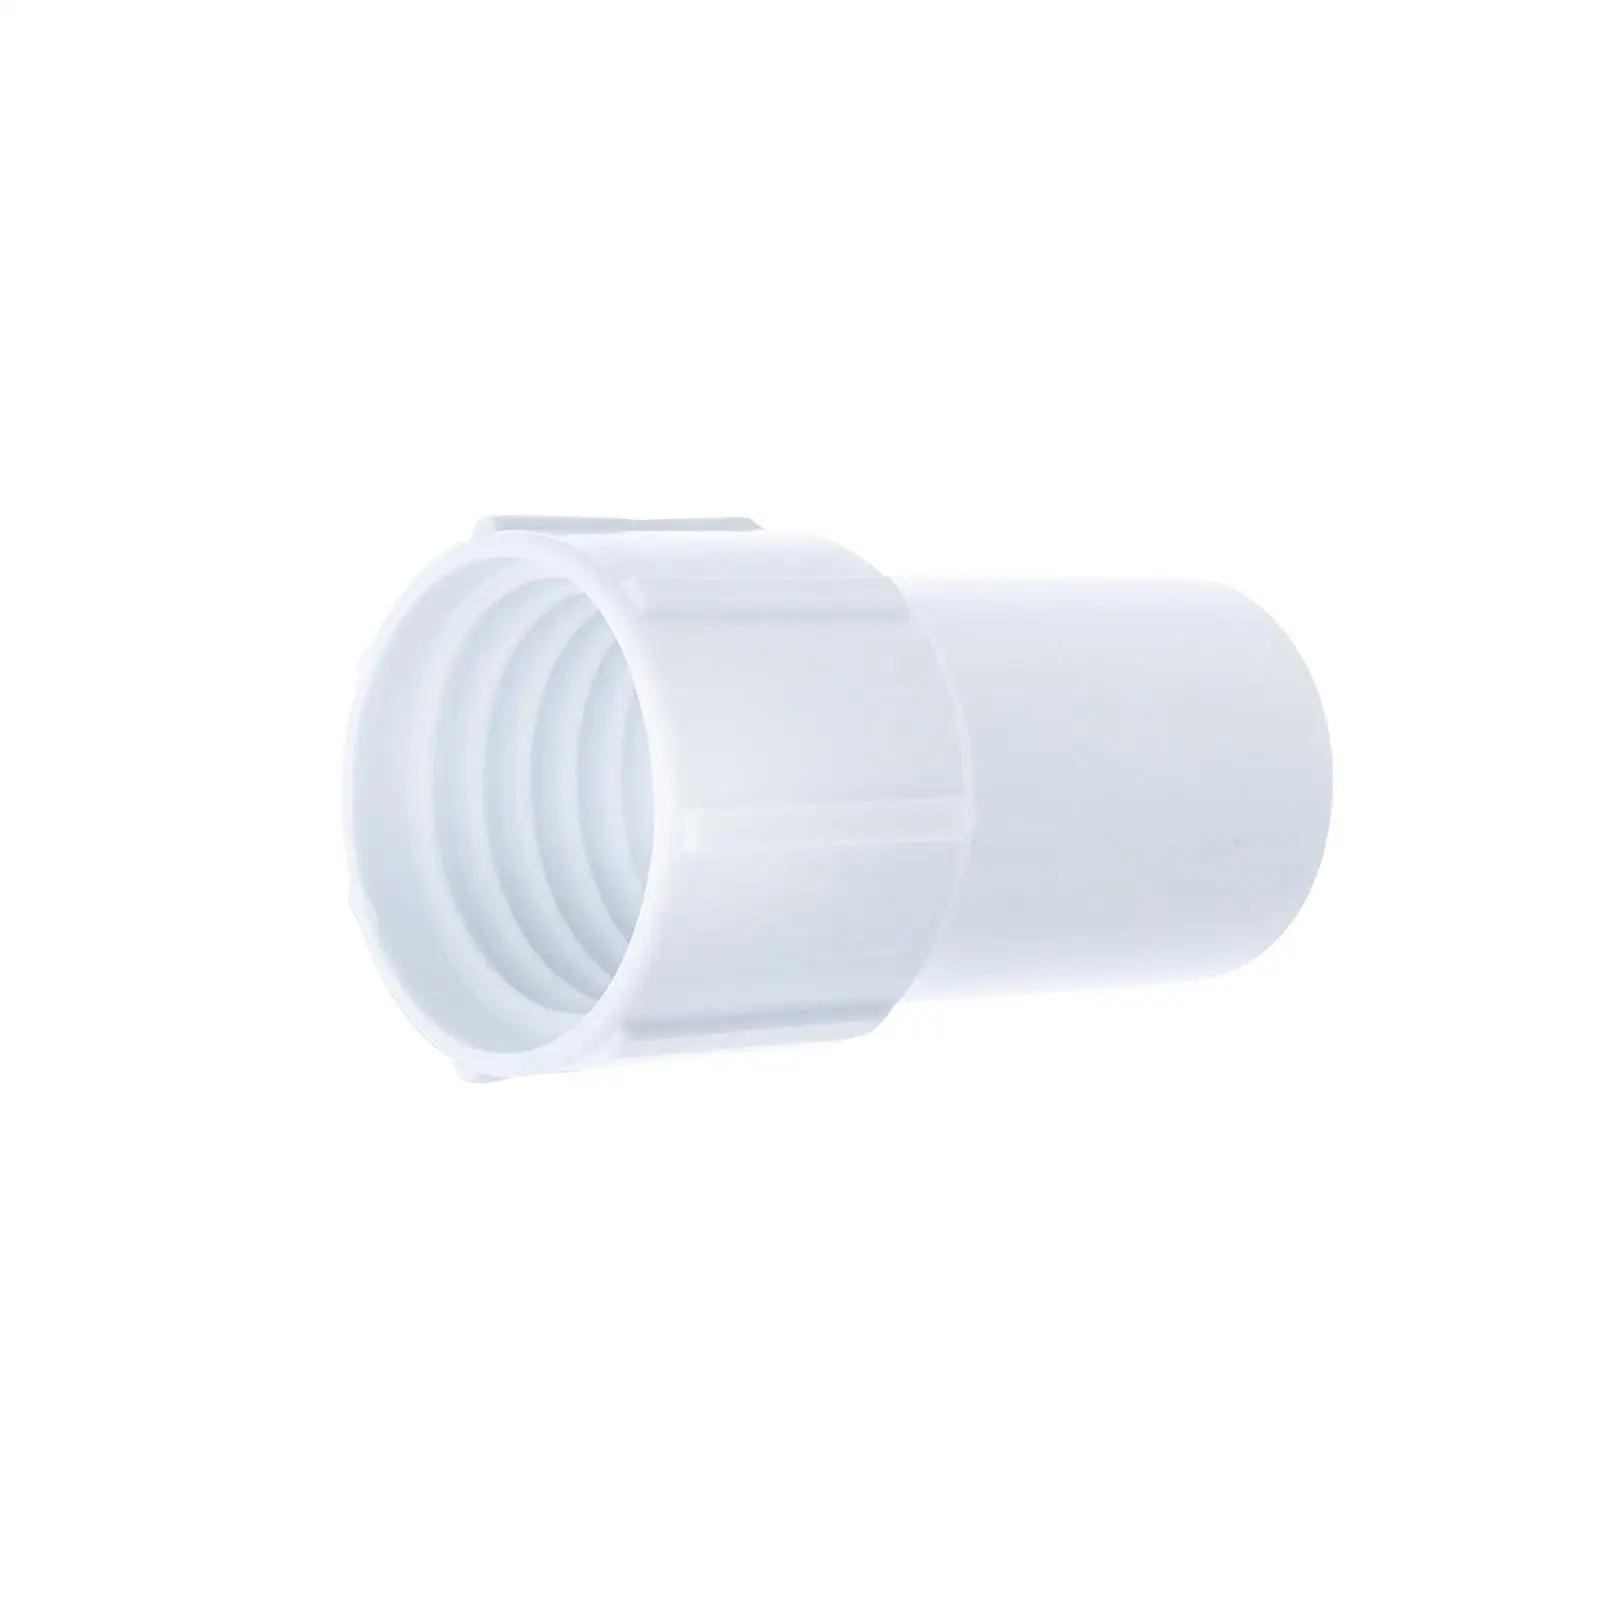 Swimming Pool Replacement Cuff 1 1/2inch Threaded Cuff for Spiral Wound Vacuum Hose Repair Hose Ends Skimmer Inlet